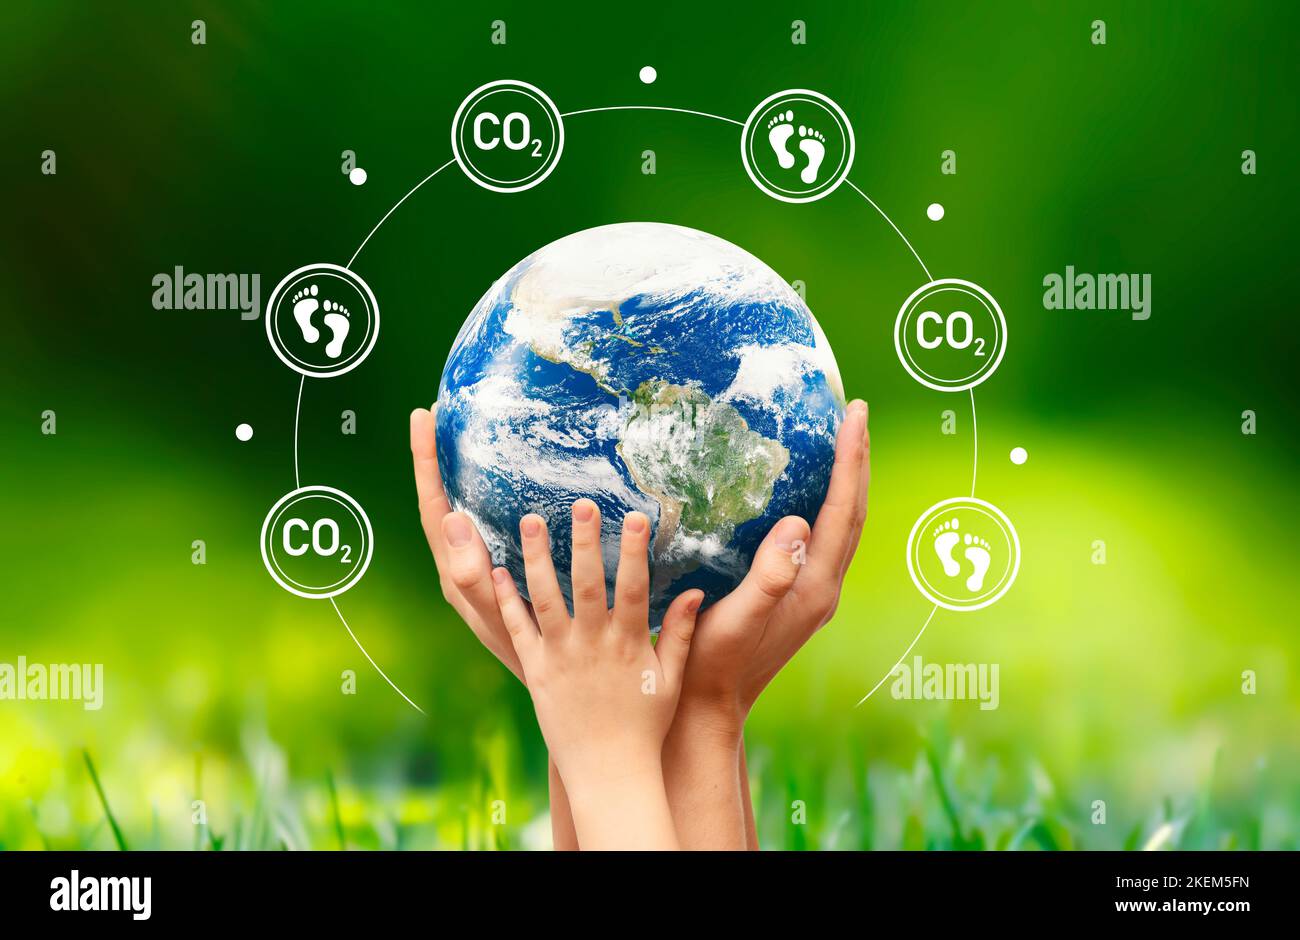 Carbon dioxide, CO2 emissions, carbon footprint concept. Elements furnished by NASA. Stock Photo